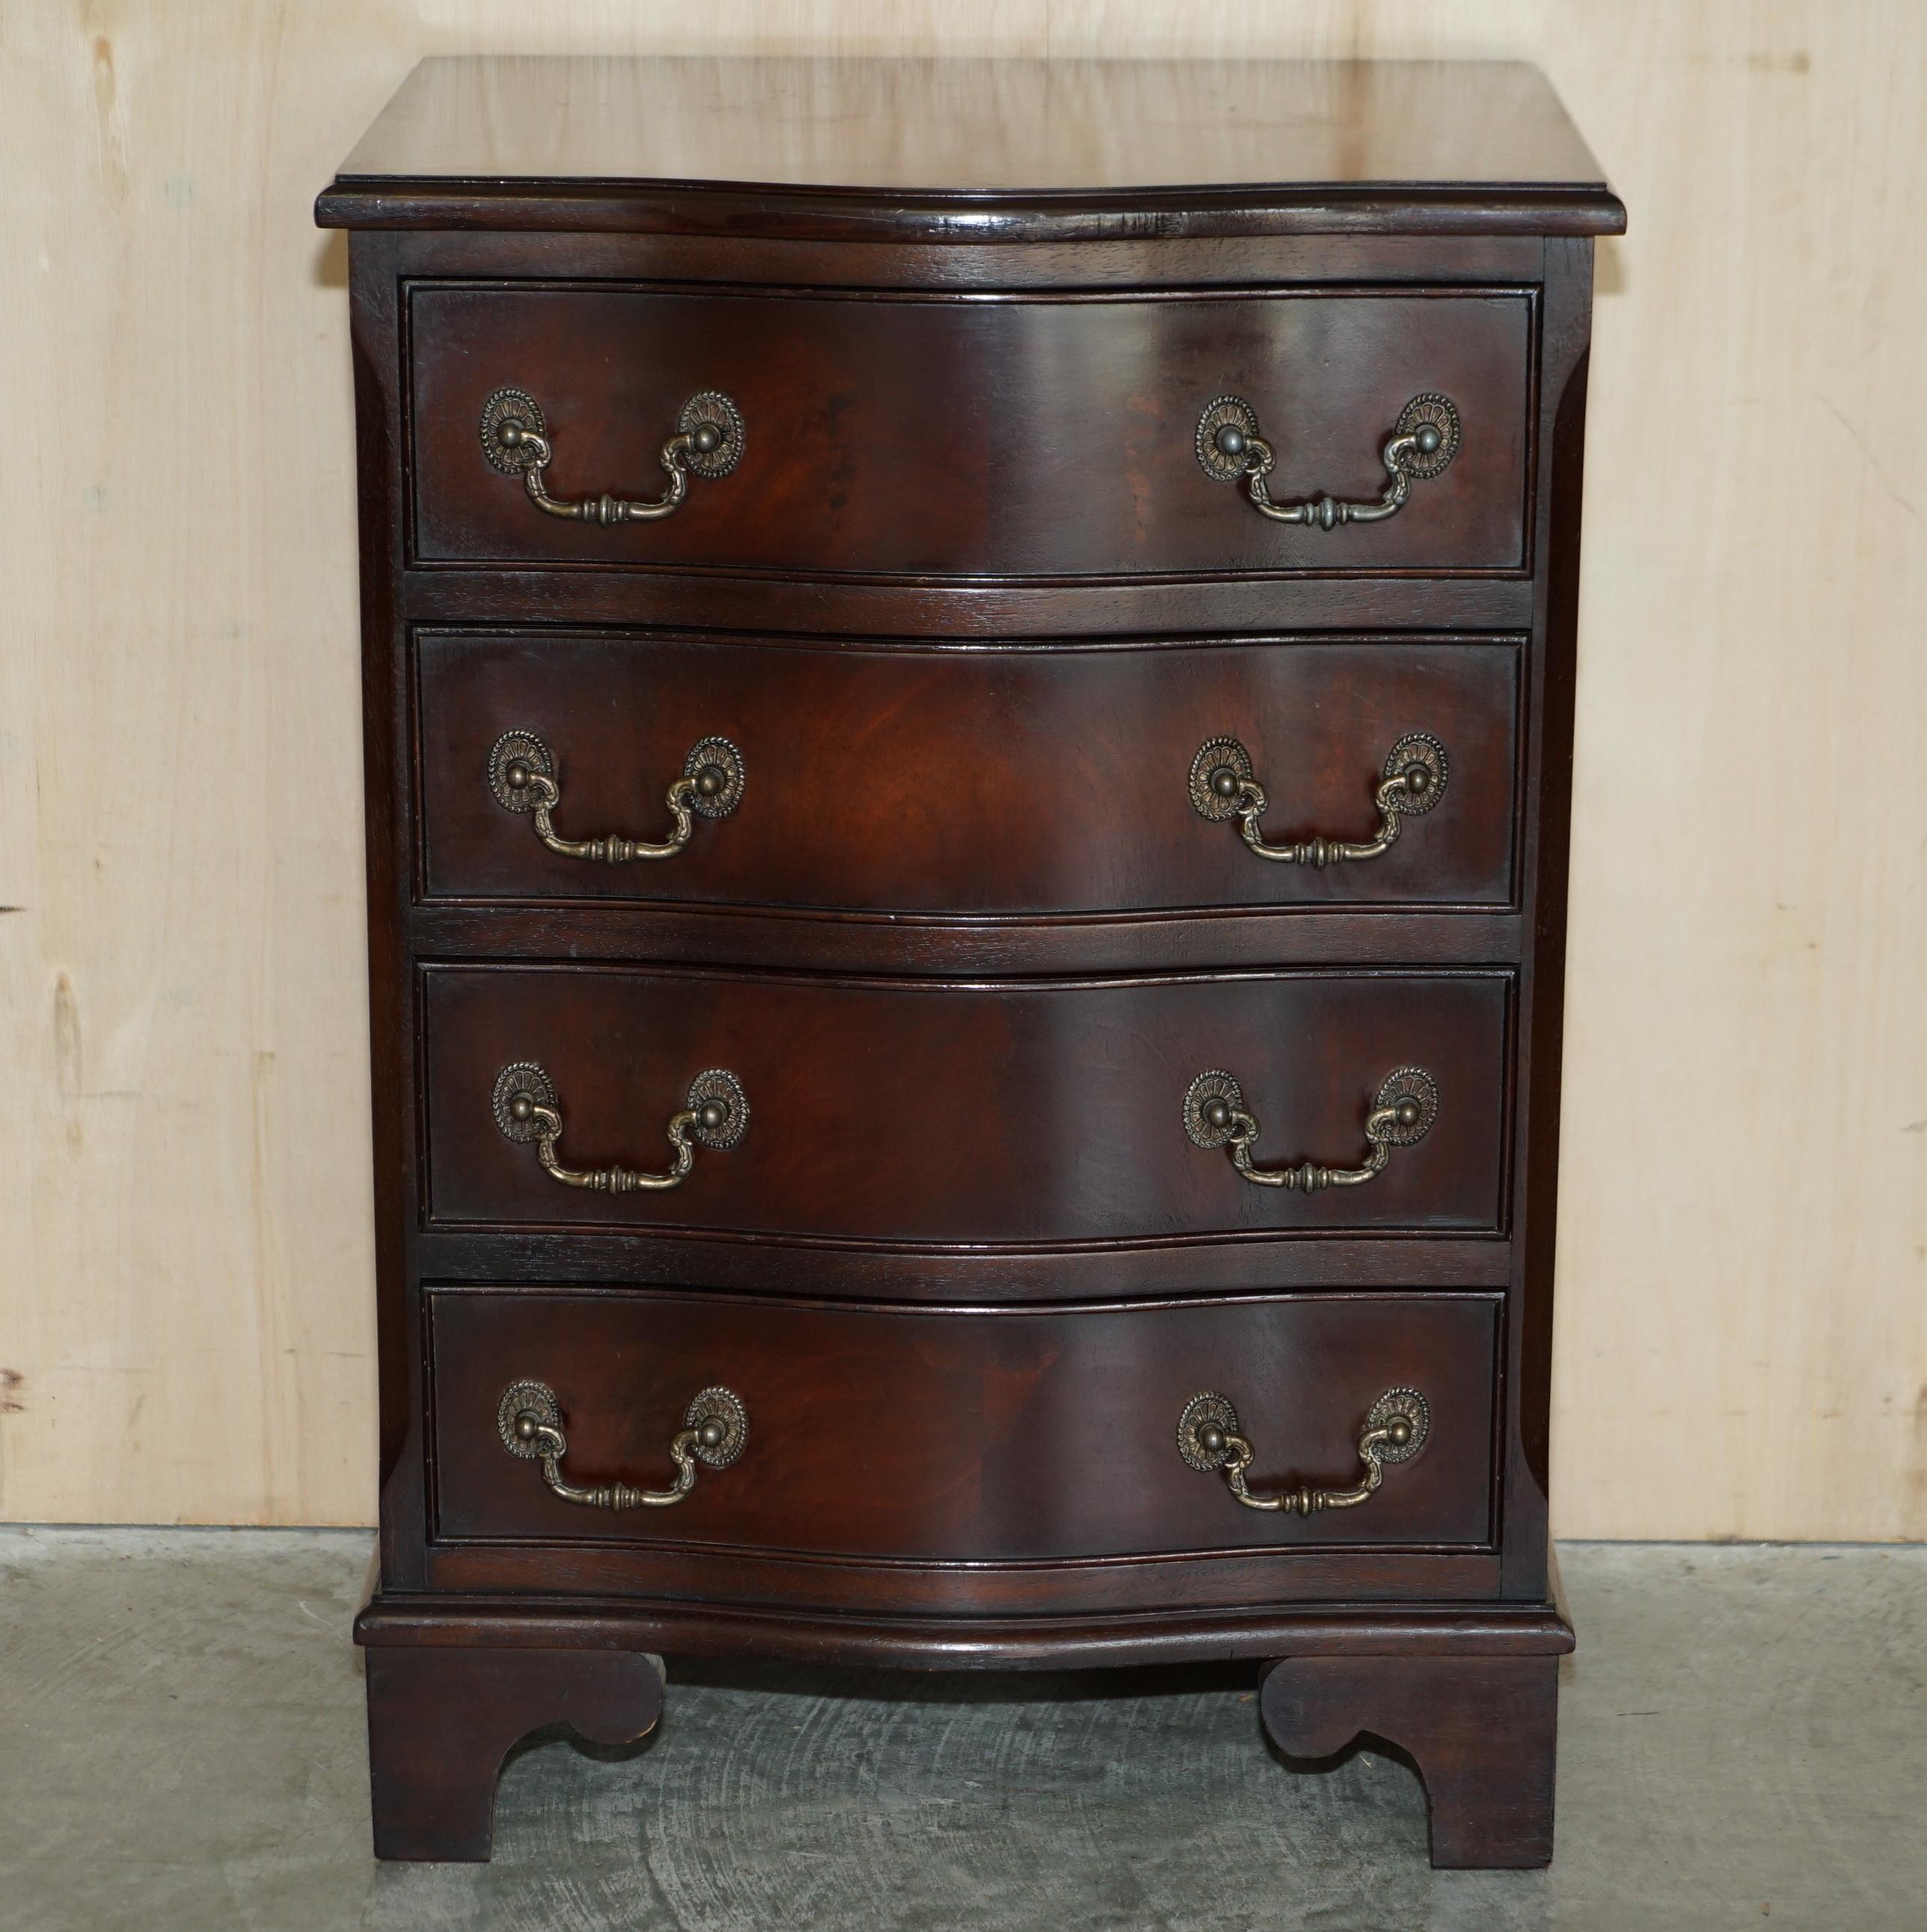 We are delighted to offer for sale this lovely serpentine fronted, flamed Mahogany Chest of drawers.

A good looking, decorative and well made piece. Its based on an early 18th century design, the timber patina is wonderful.

We have cleaned